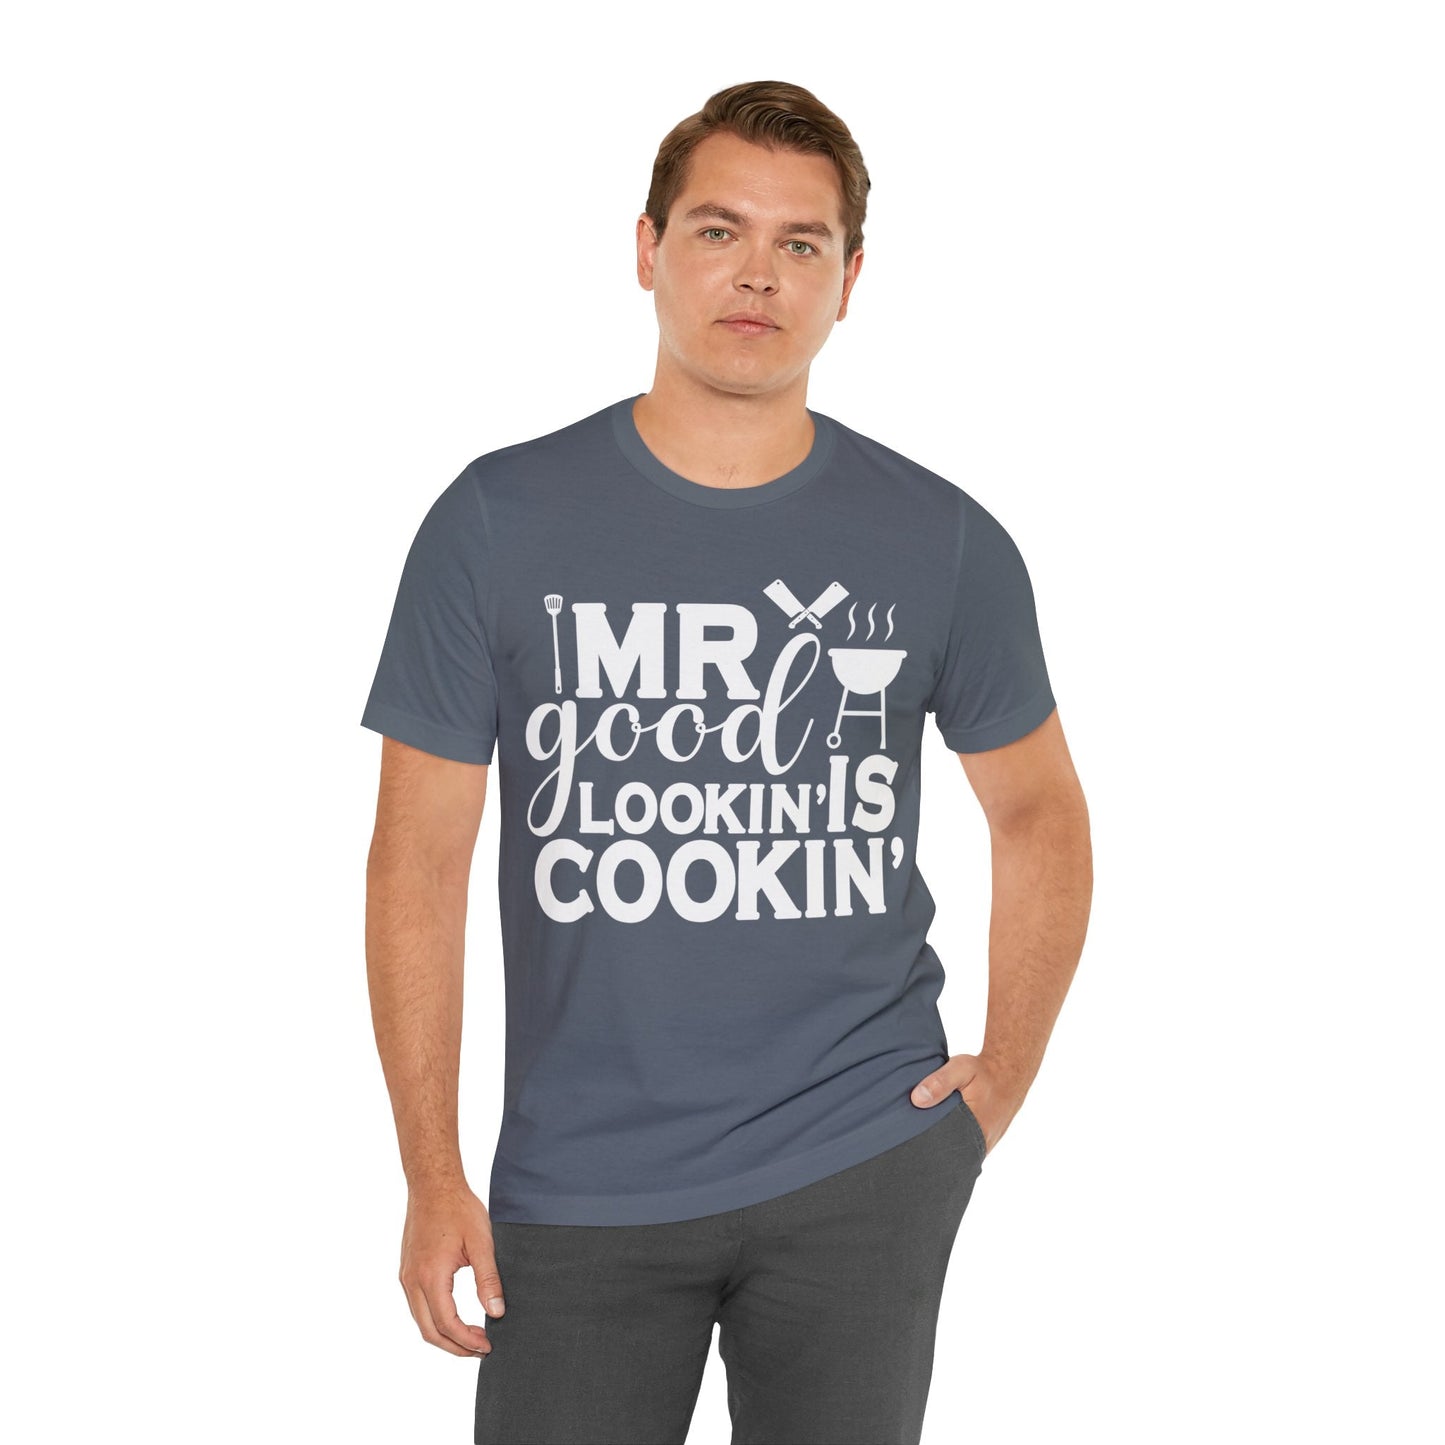 Mr good lookin is cookin T - Shirt - The Cavemanstyle